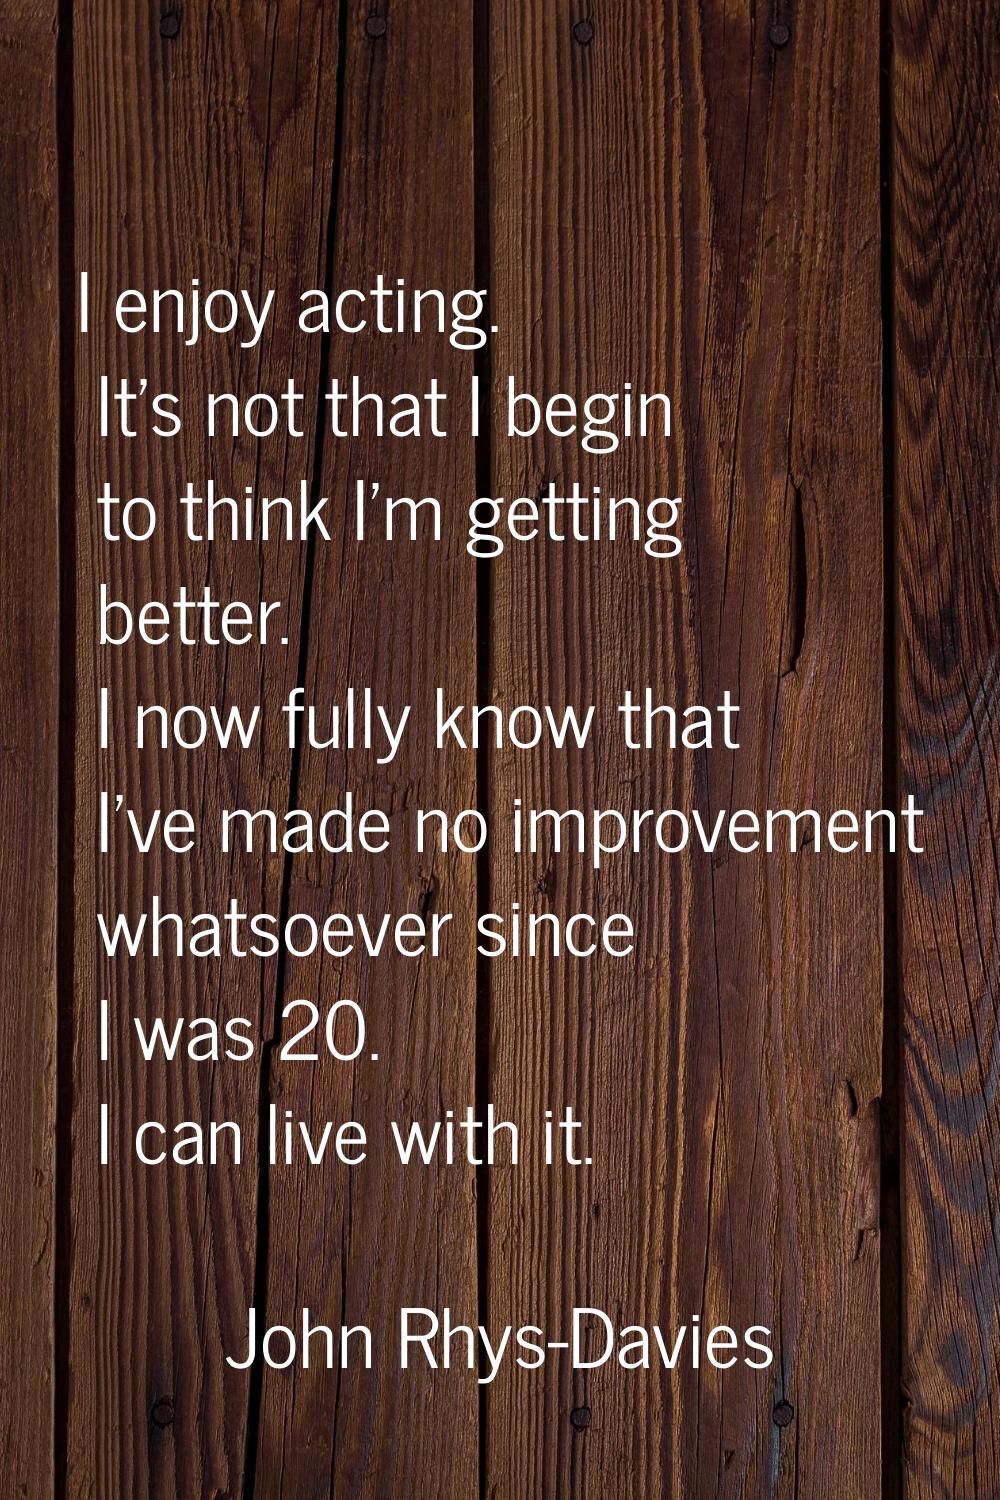 I enjoy acting. It's not that I begin to think I'm getting better. I now fully know that I've made 